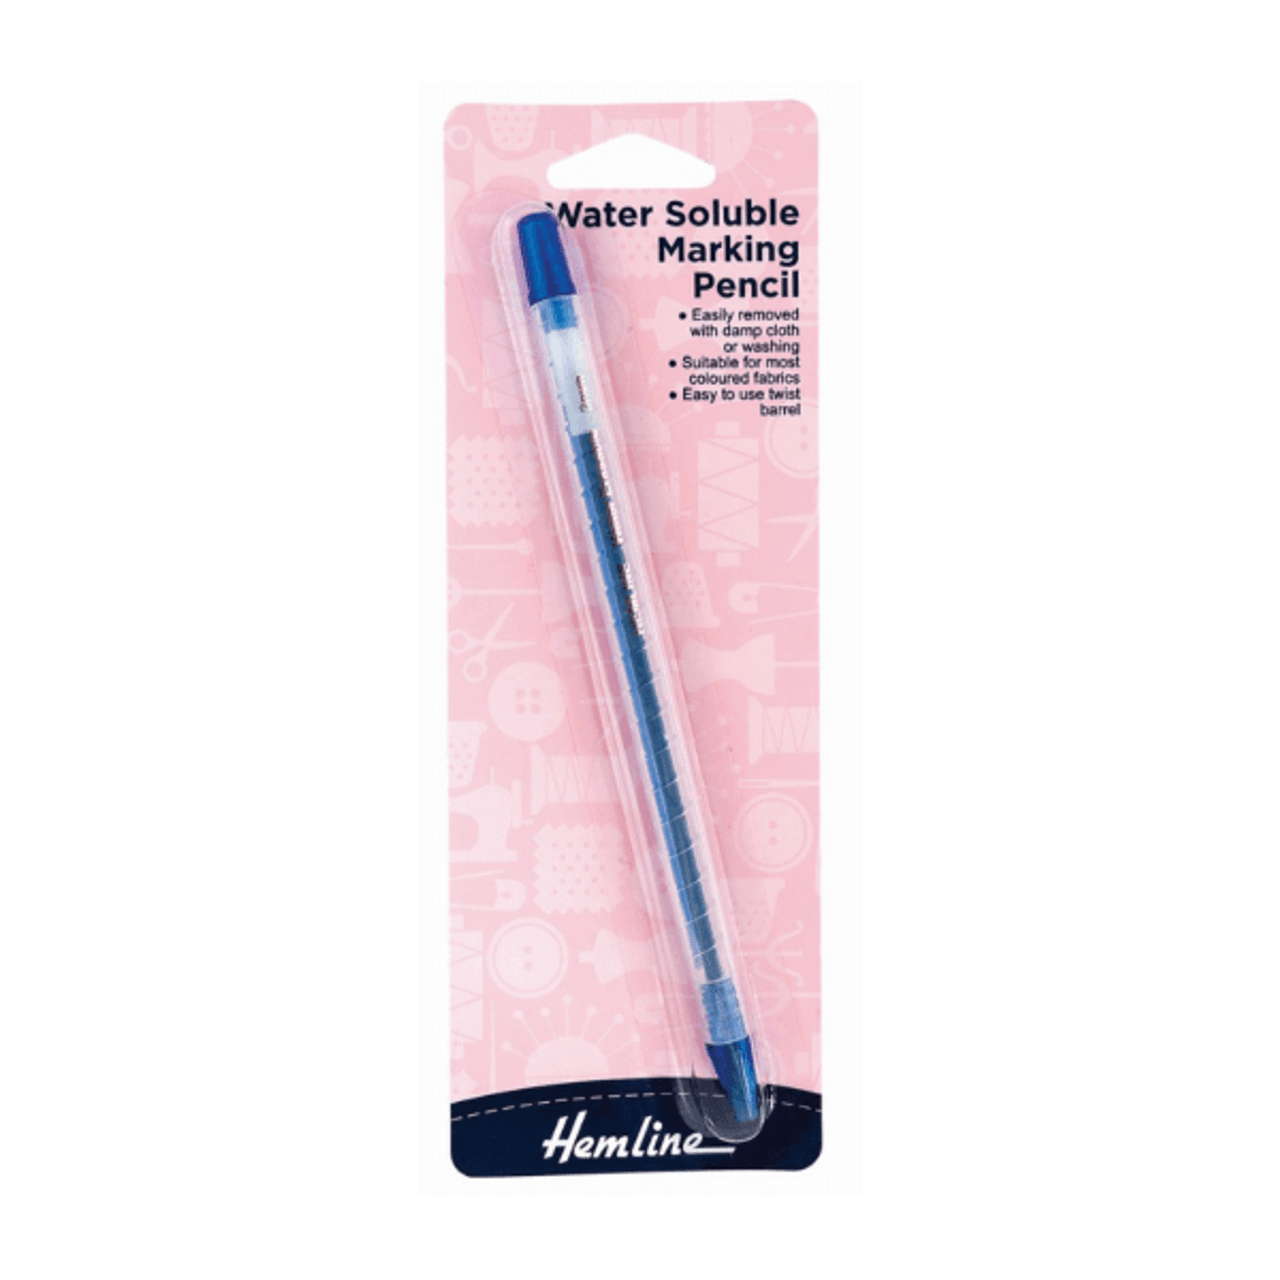 Water Soluble Marking Pencil | Blue